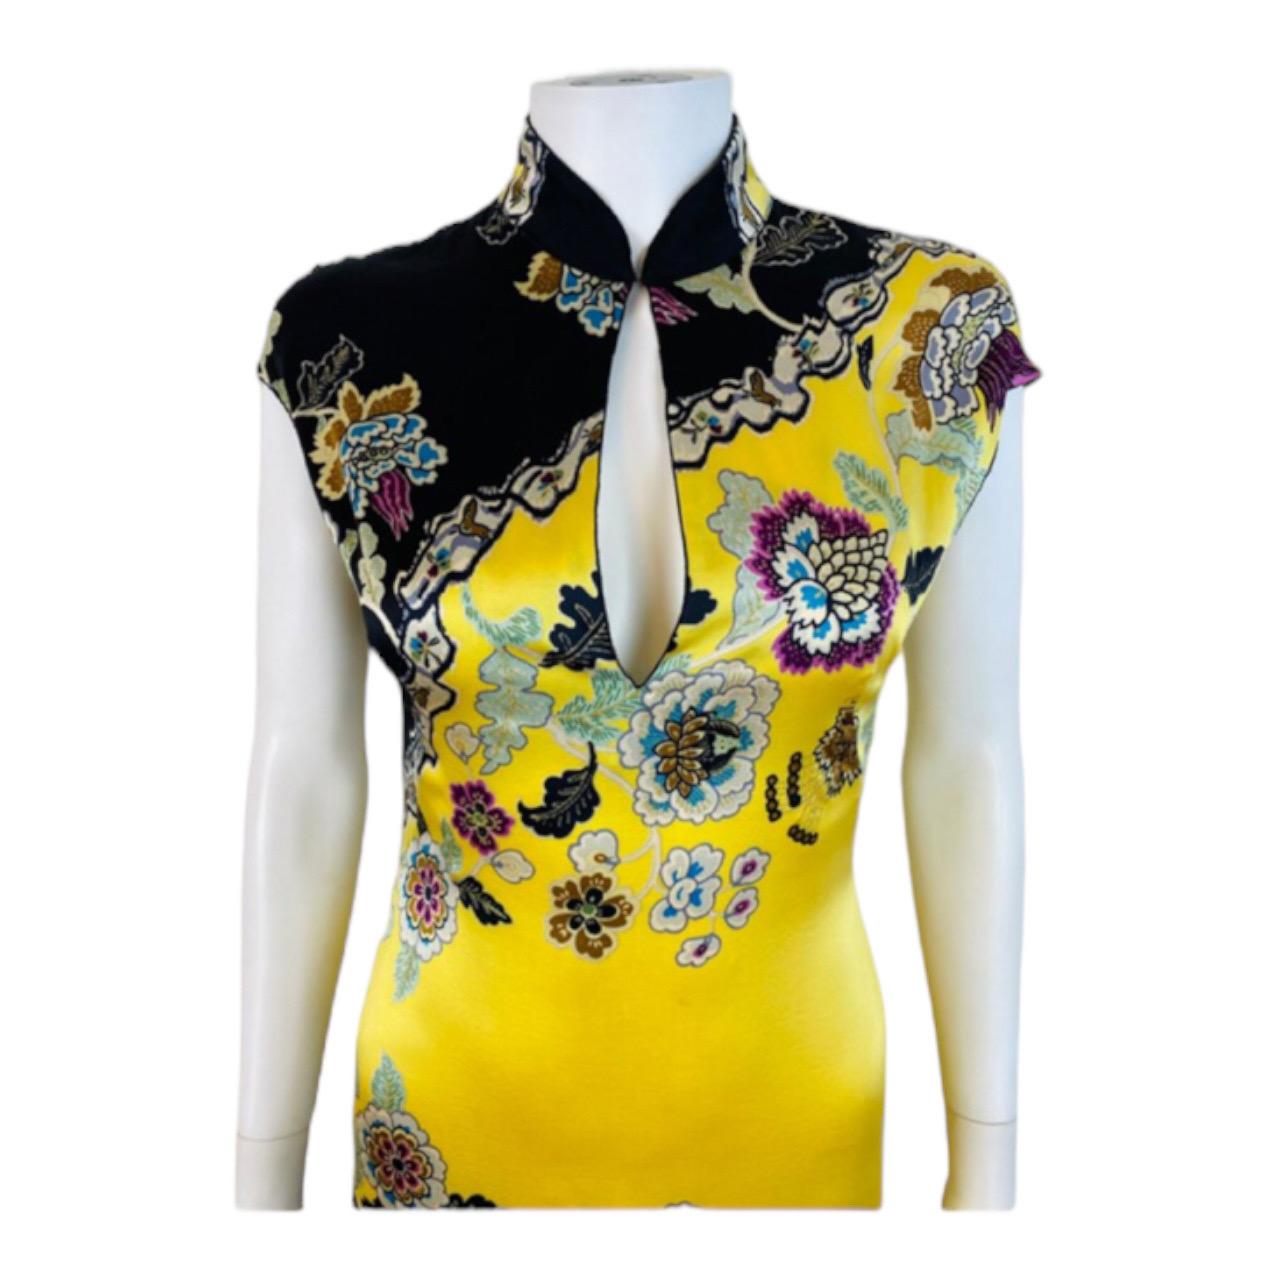 Vintage Roberto Cavalli S/S 2003 Chinoiserie Yellow Floral Silk Mini Dress For Sale 1